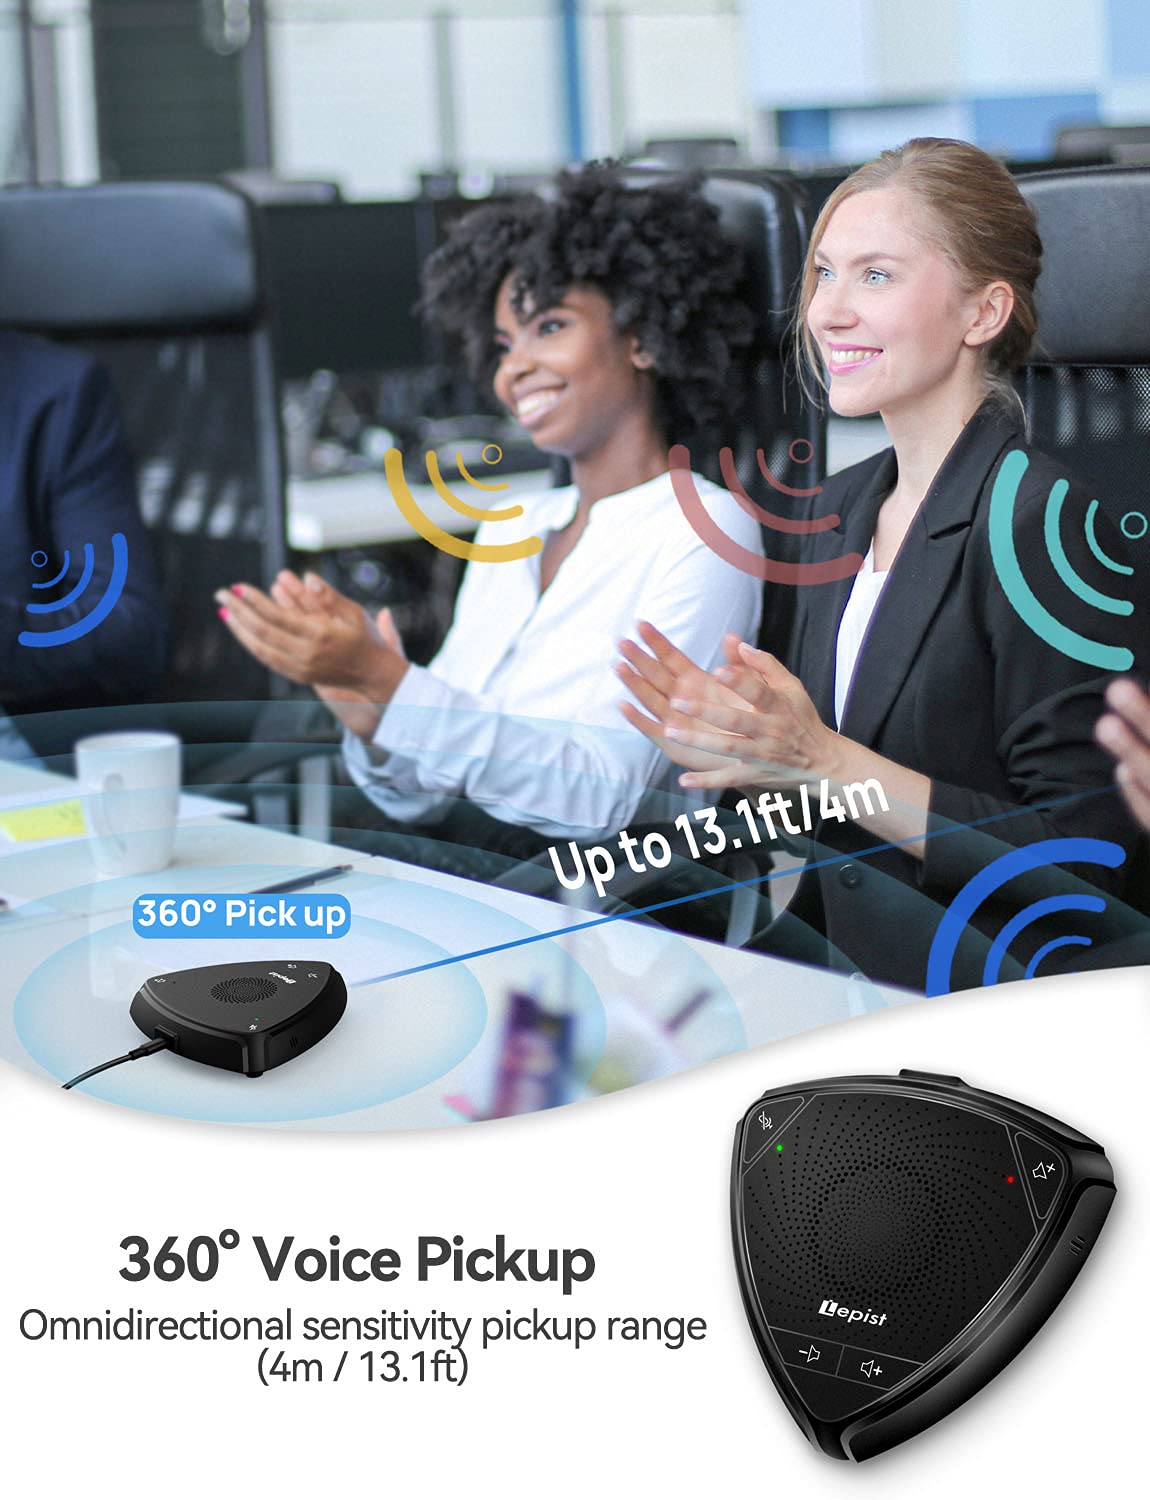 USB Speakerphone, Lepist Computer Speakers with Microphone for 4 People Business Conference 360° Voice Pickup, USB Skype Speakerphone Conference Call Speaker with Microphone, Plug and Play, LE2101N